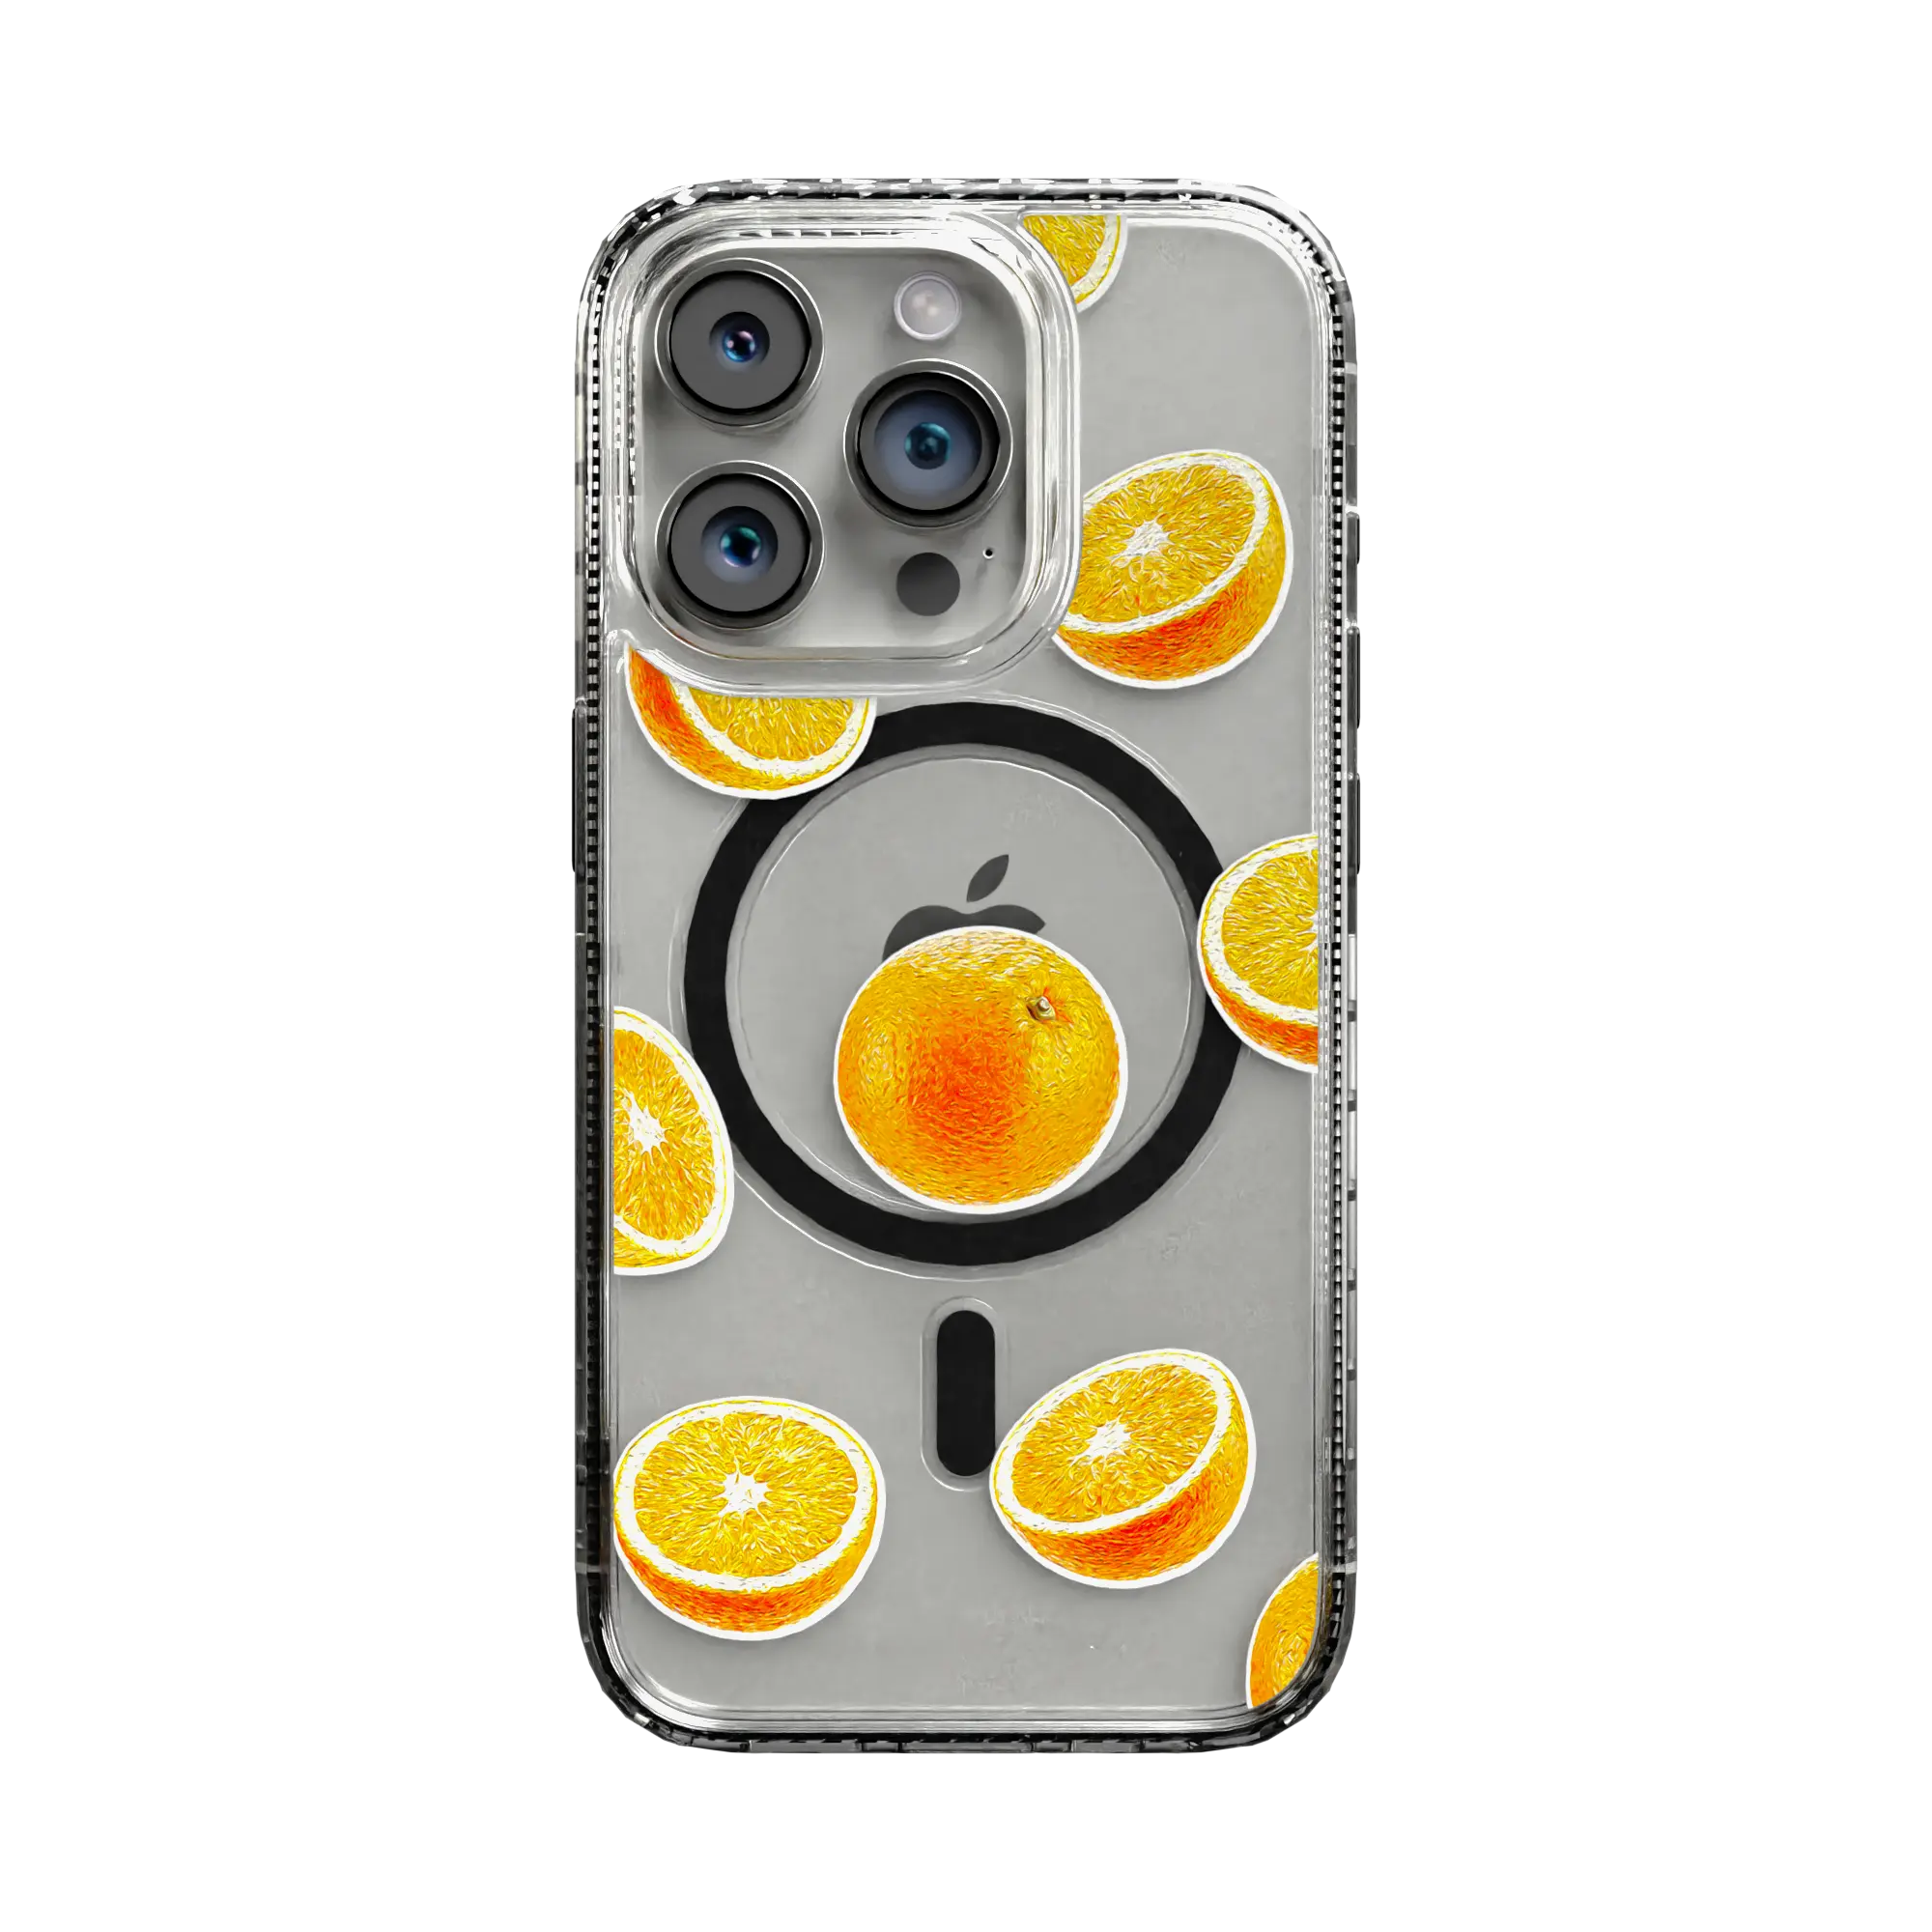 Apple-iPhone-14-Pro-Crystal-Clear Orange Zest | Protective MagSafe Case | Fruits Collection for Apple iPhone 14 Series cellhelmet cellhelmet